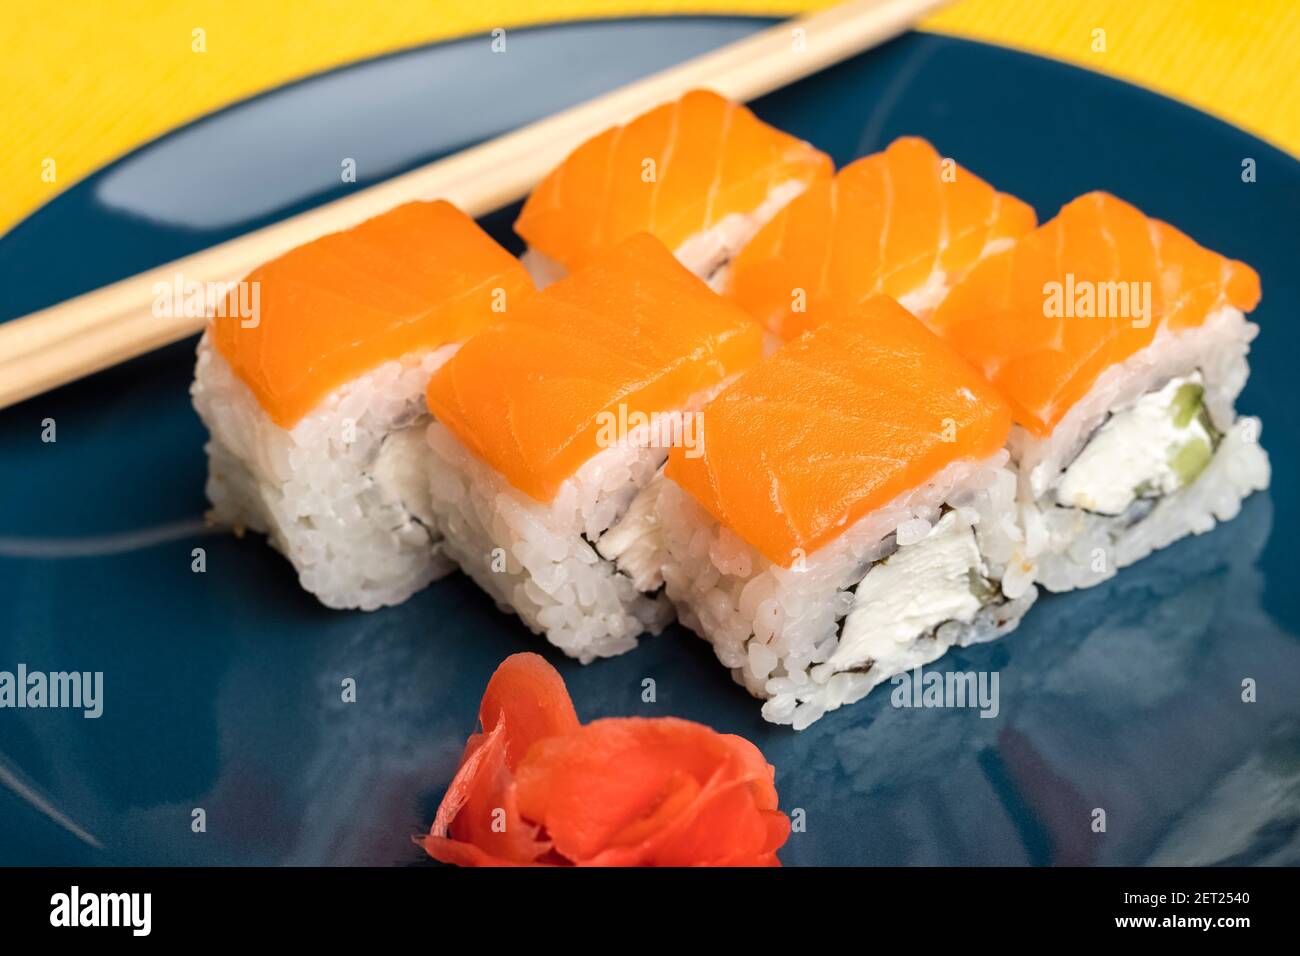 Rolls with pieces of salmon on a blue plate Stock Photo